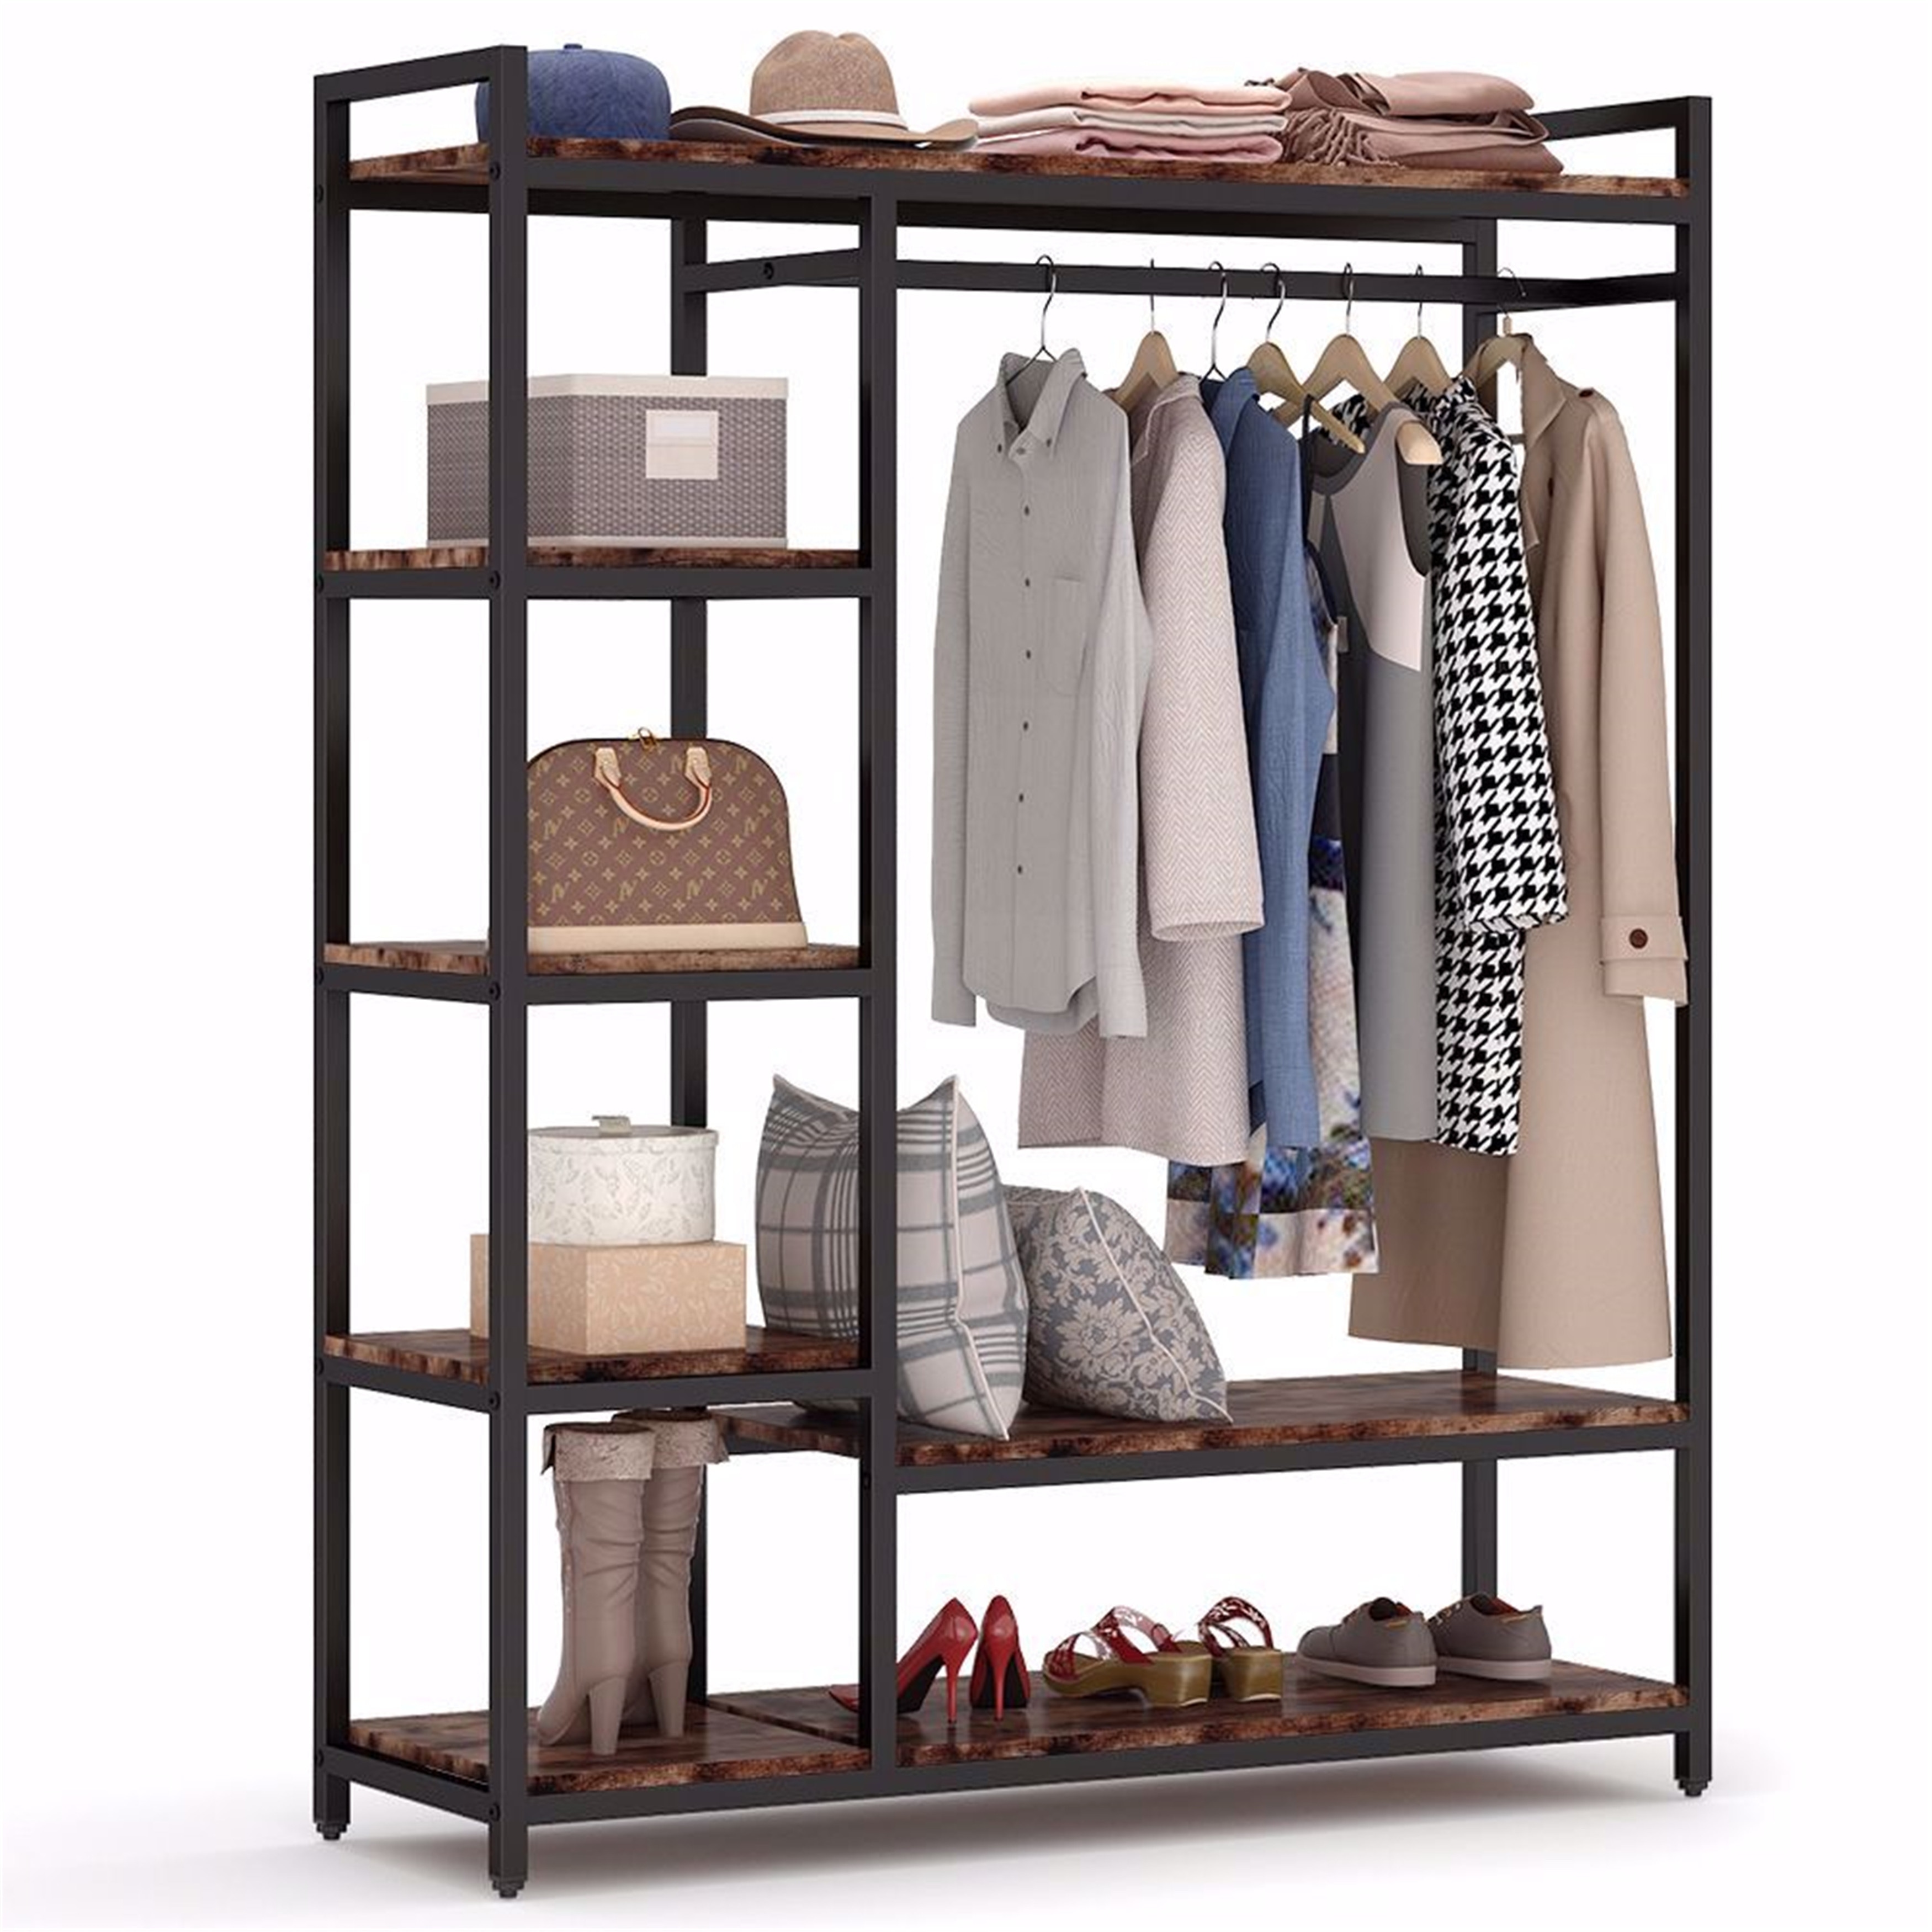 https://ak1.ostkcdn.com/images/products/is/images/direct/b8c6749bfc14df573336efc2feb52725d2b3727e/Free--Standing-Closet-Organizer-Storage-Shelves-and-Hanging-Bar.jpg